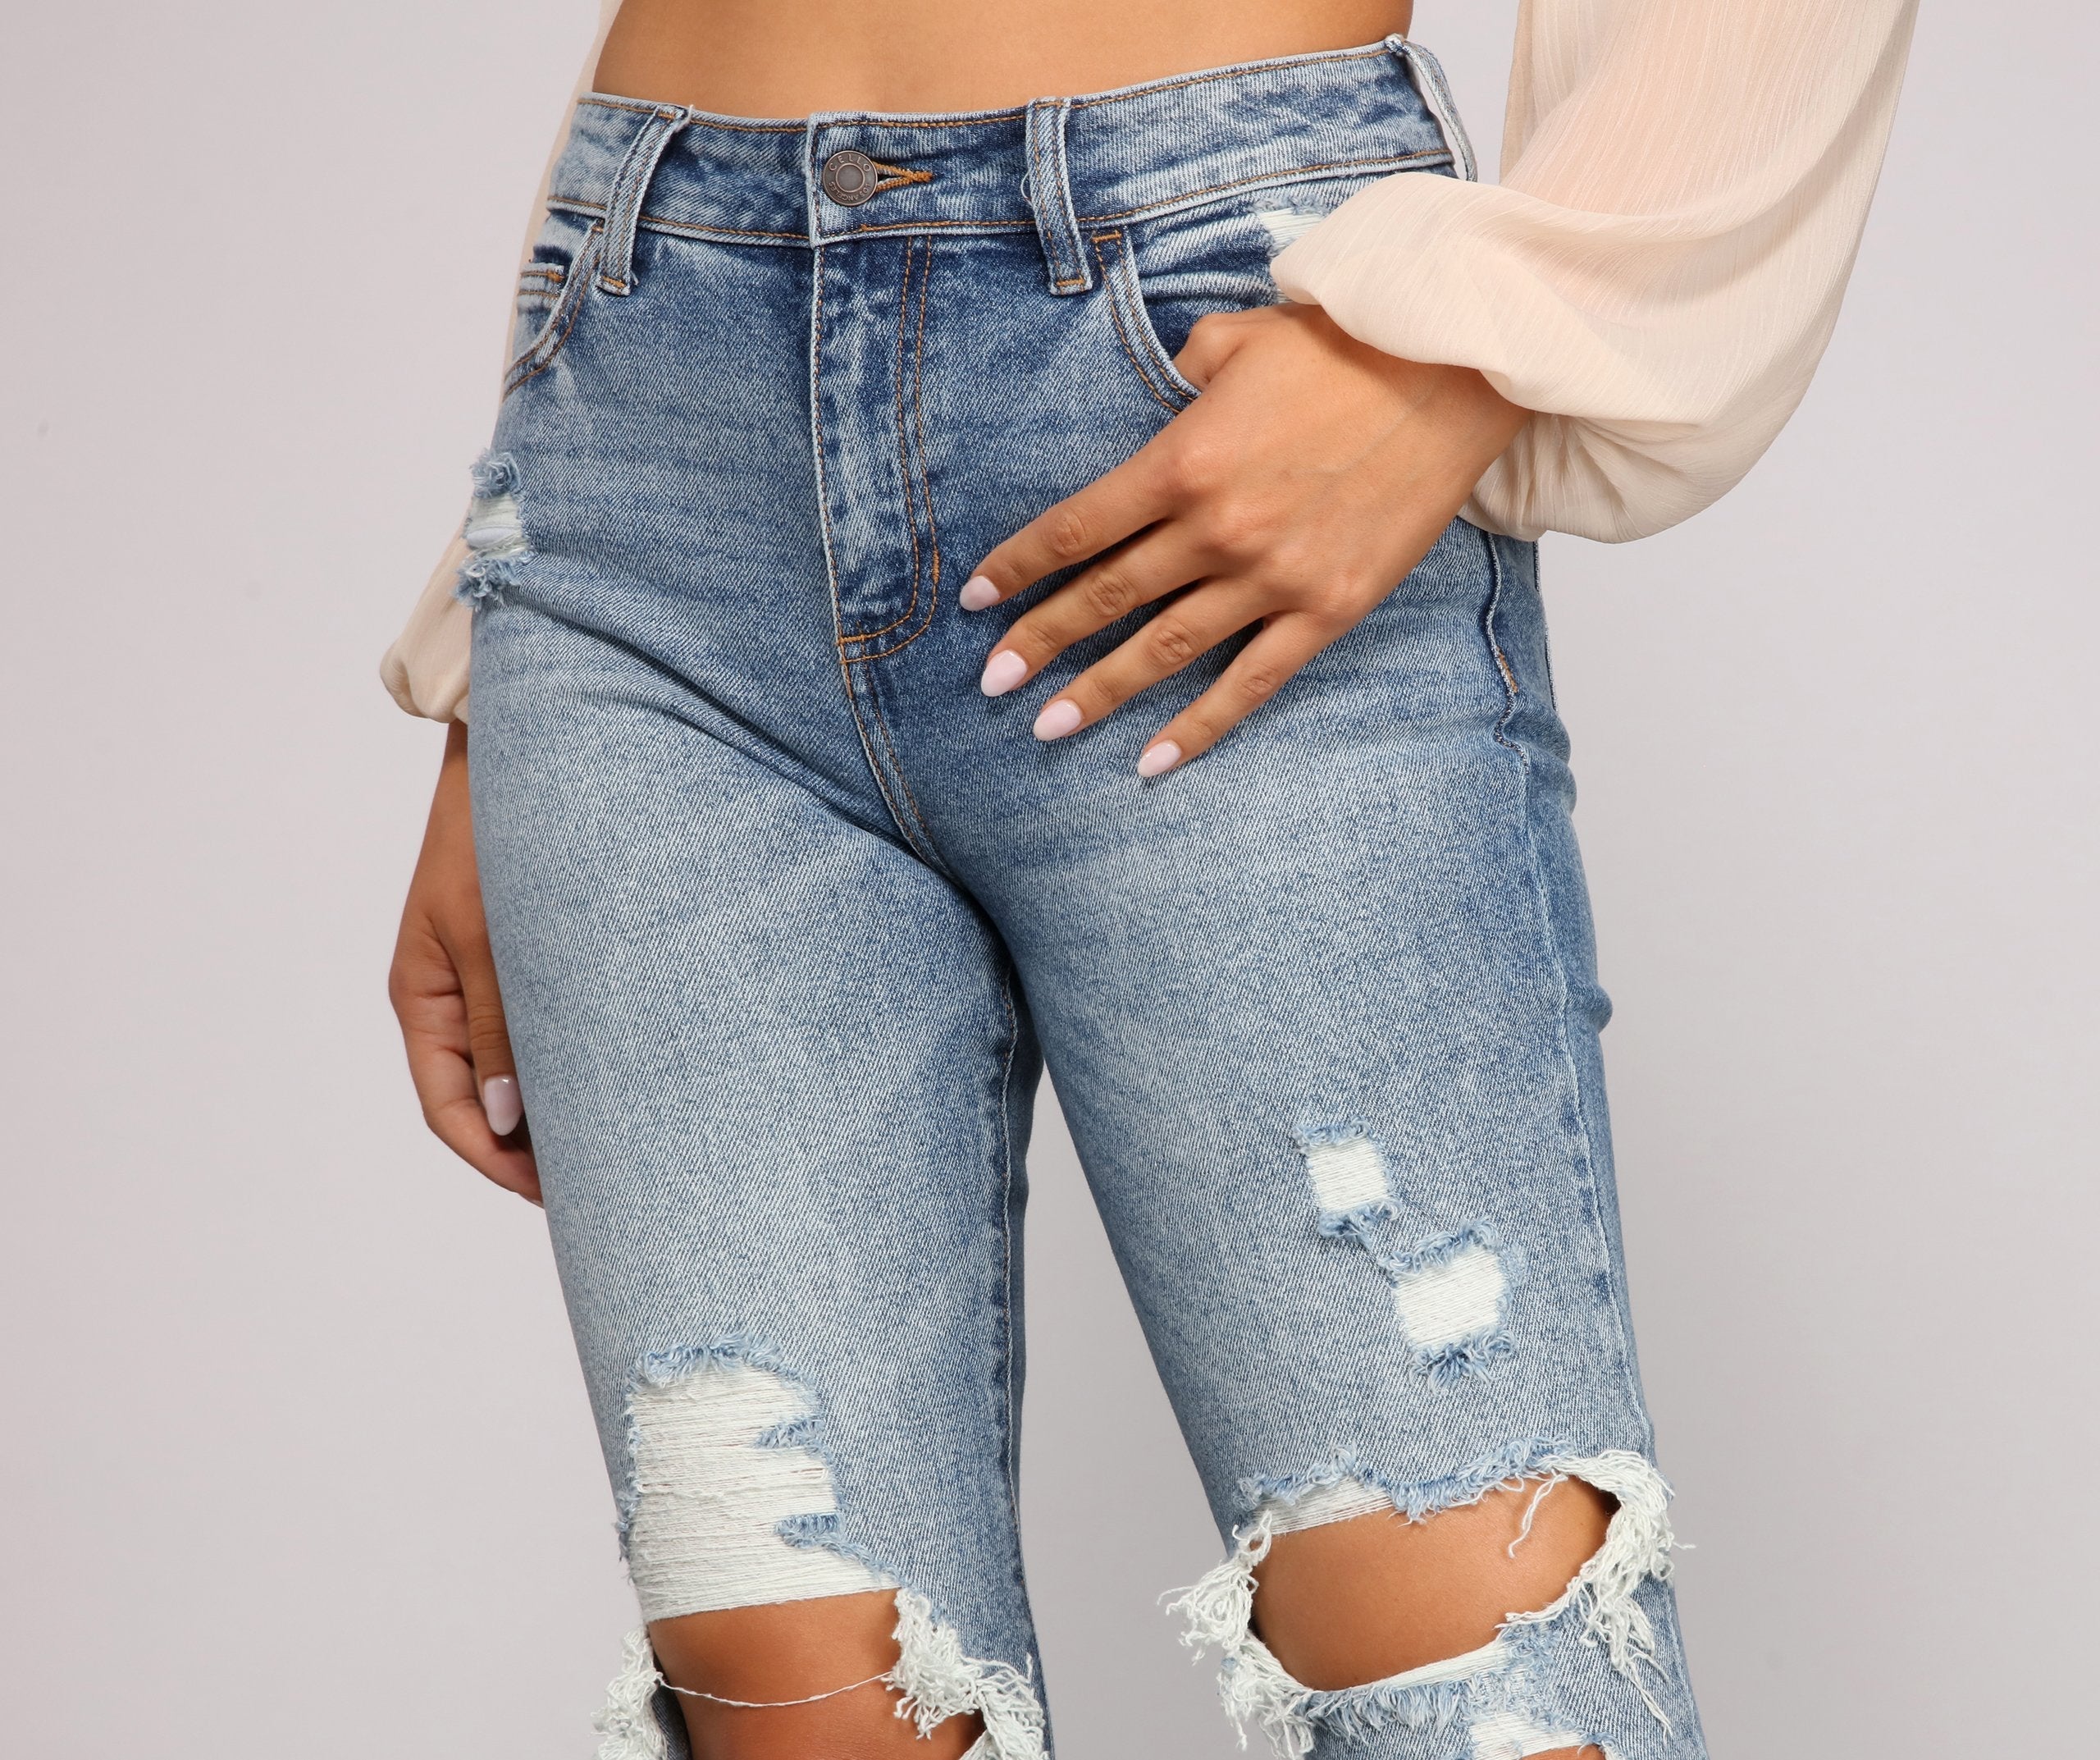 Stylish Staple High Rise Skinny Jeans - Lady Occasions